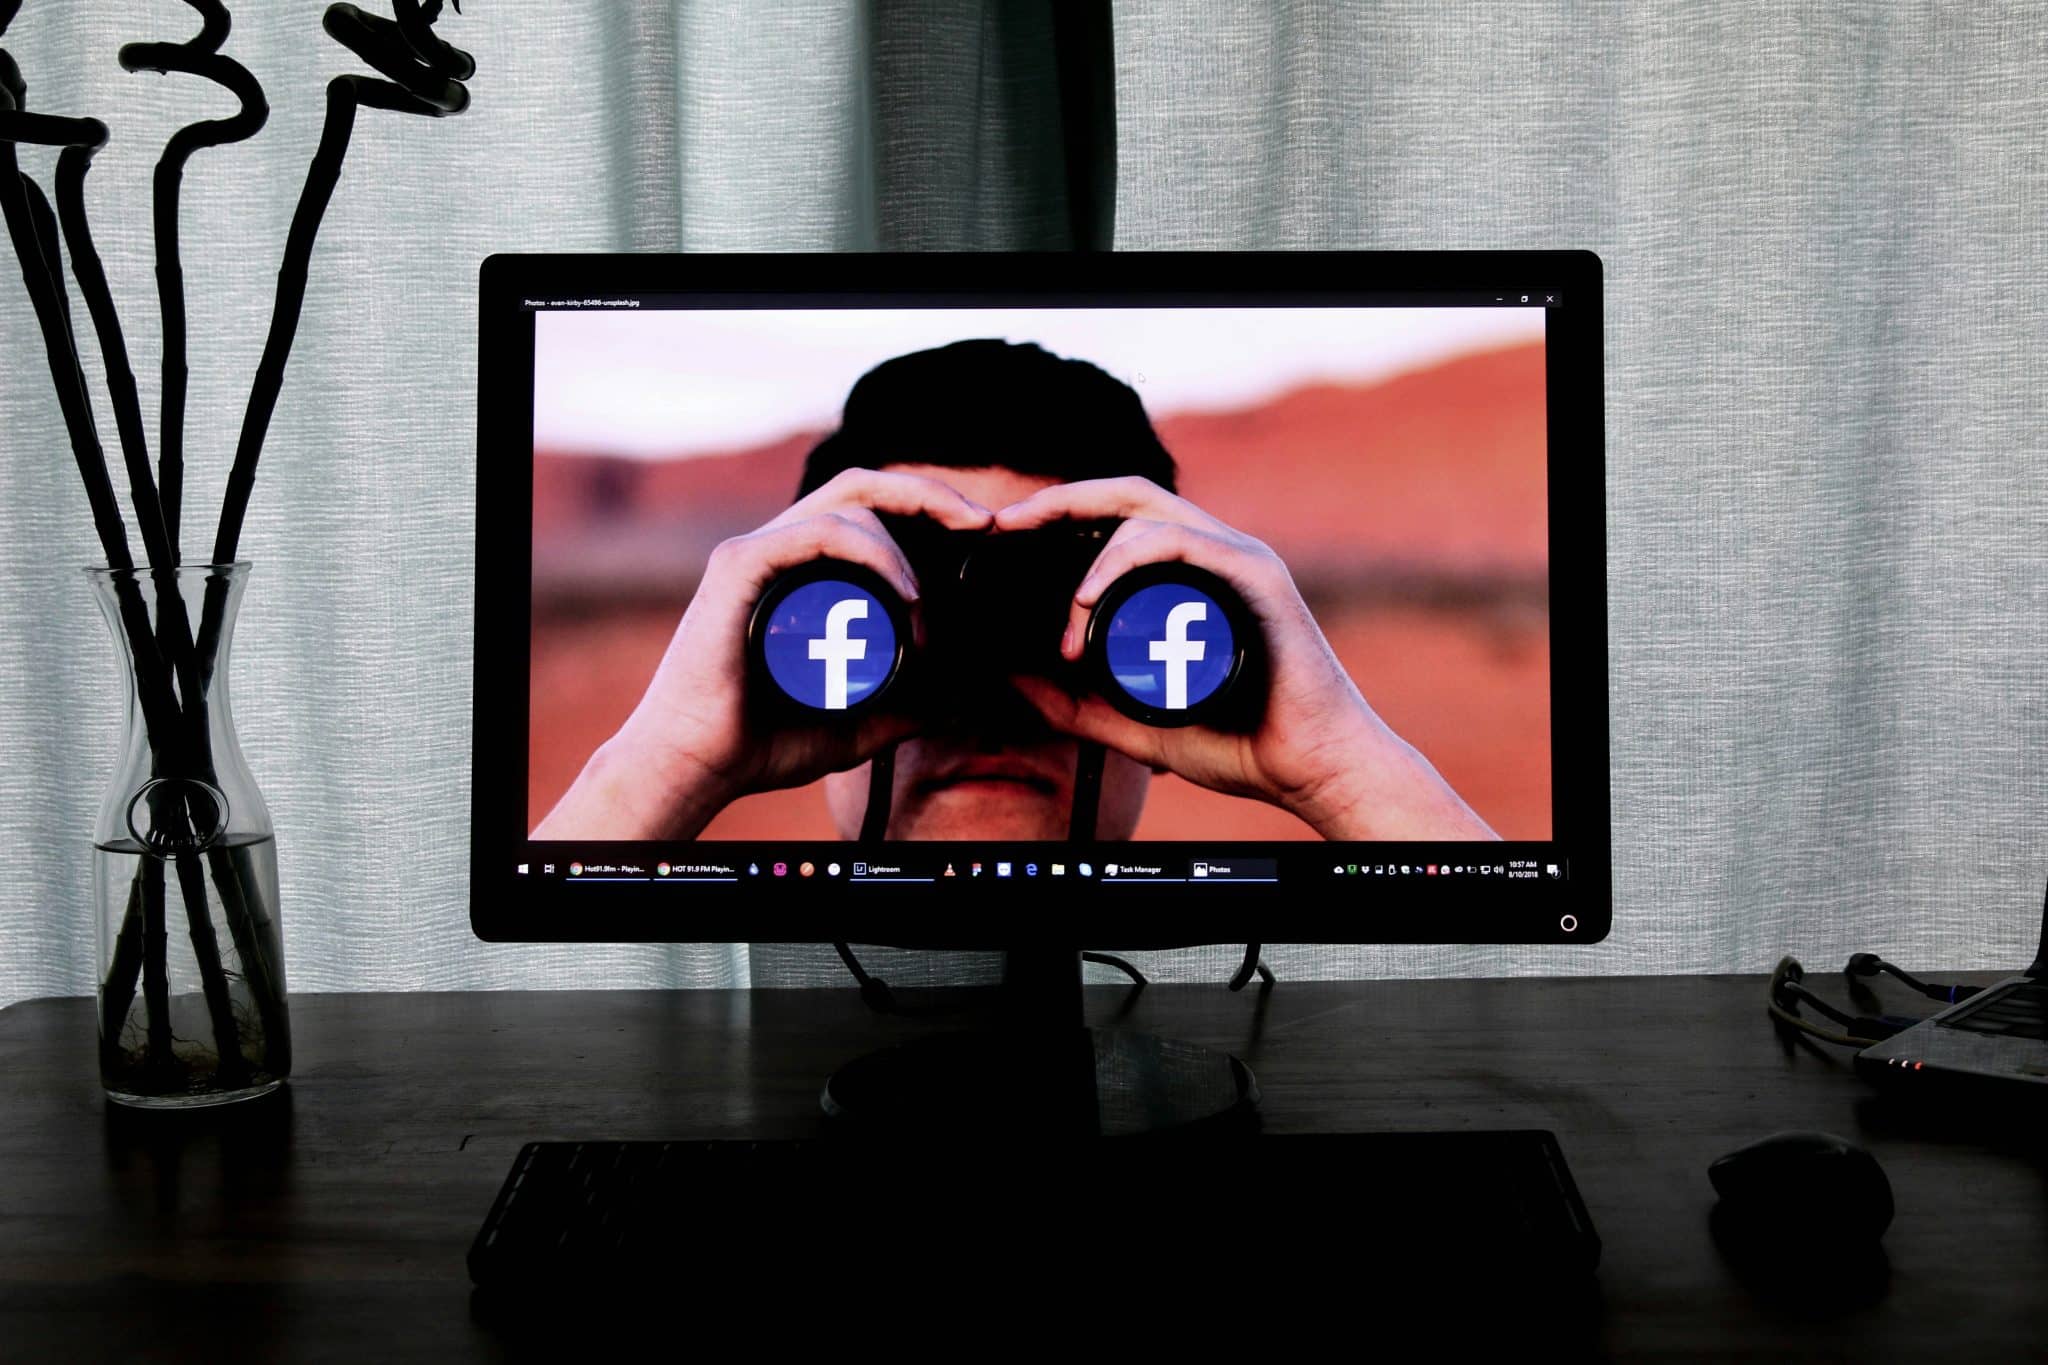 Court Document Reveals Facebook’s Spying on Snapchat’s Traffic – The TechLead